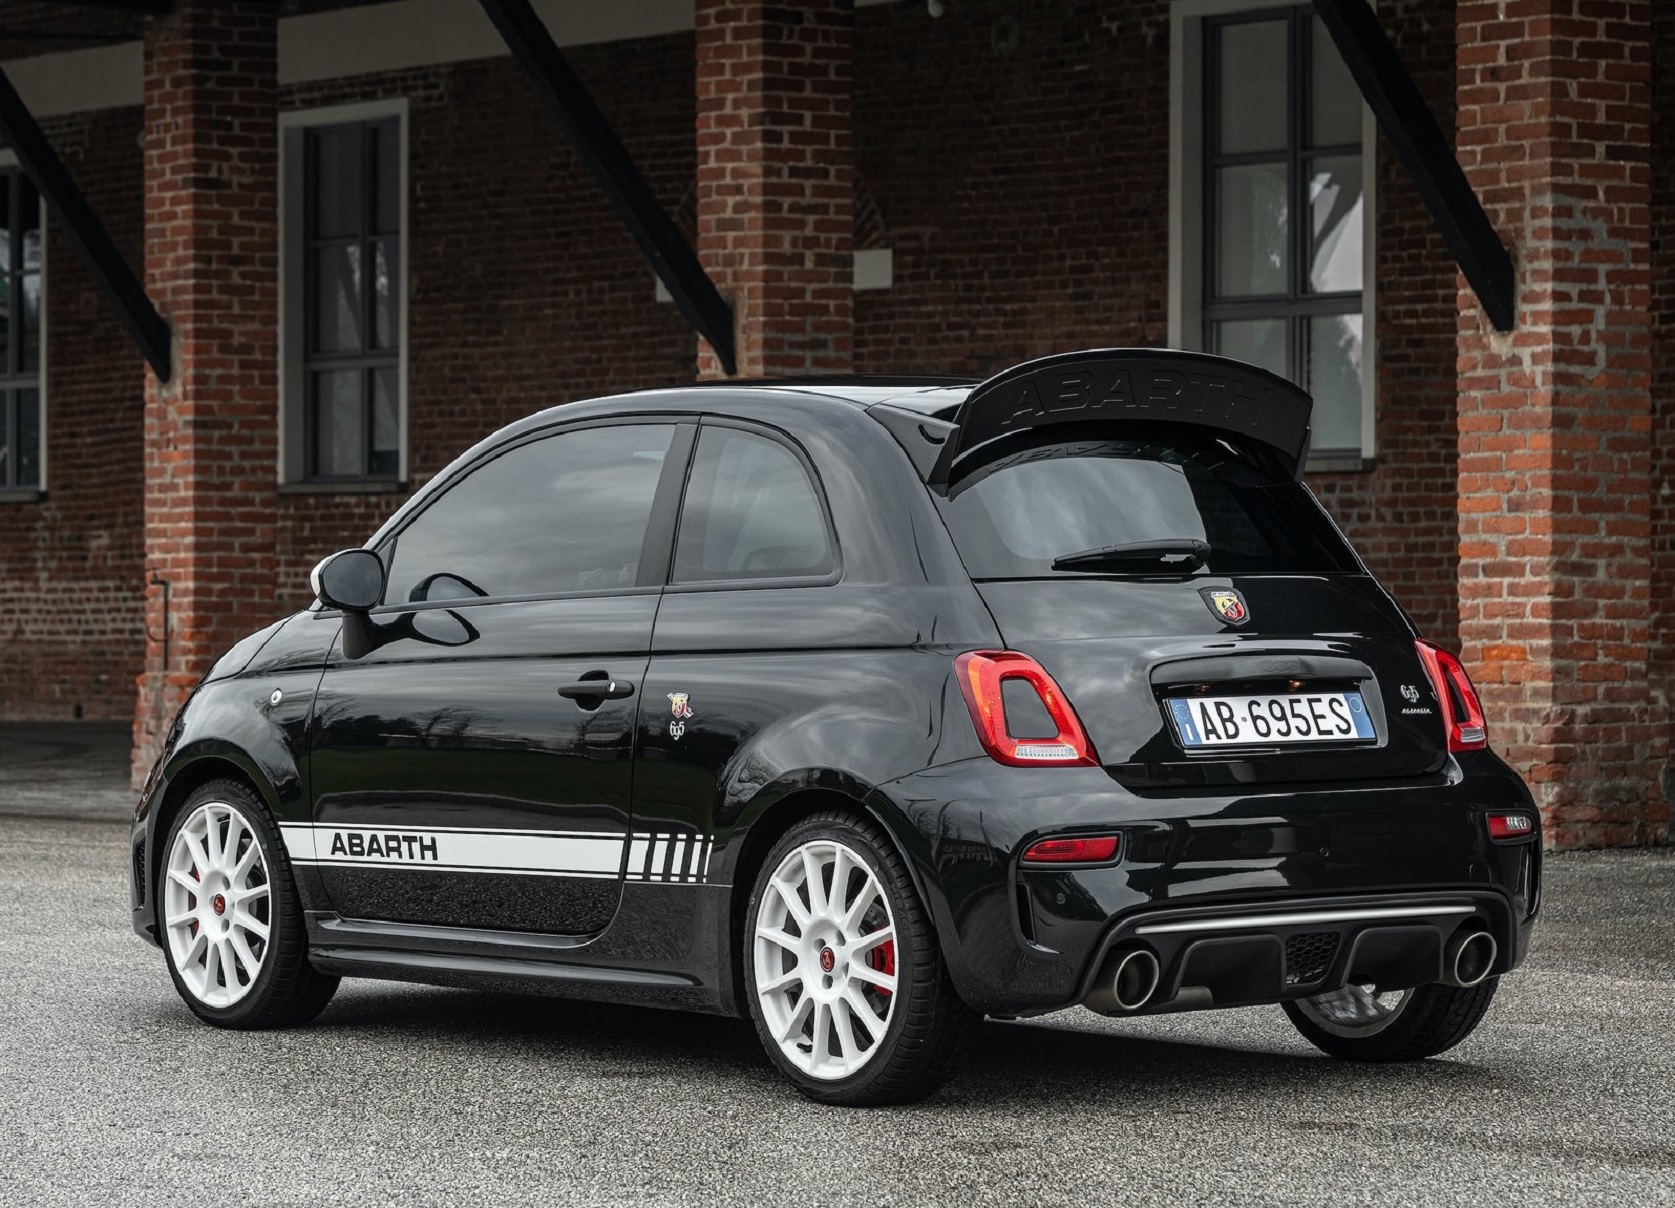 Empirisch aflevering Raad eens The Forbidden-Fruit 695 EsseEsse Gives the Fiat 500 Abarth More Sting